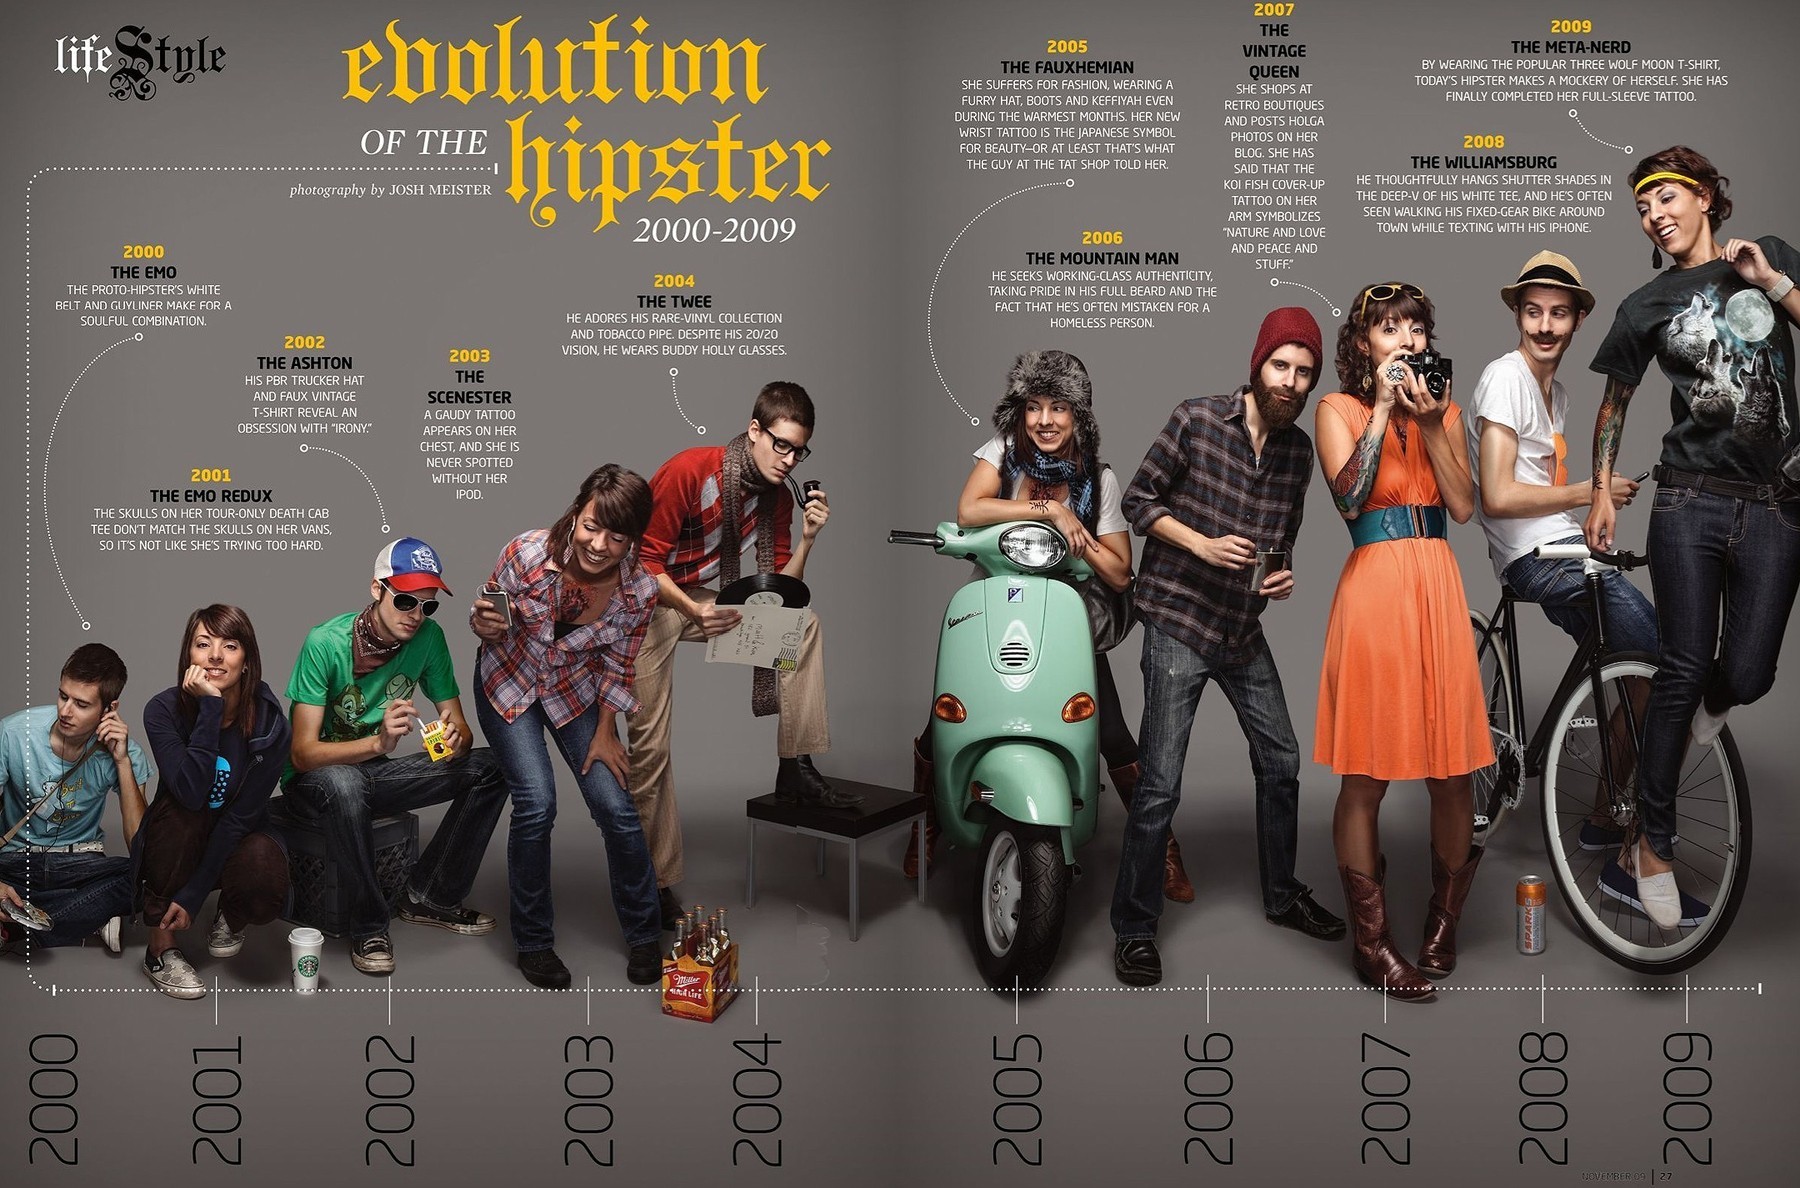  Wallpapers on Hipster Evolutionofthehipster Hd Wallpaper   Cars   Trucks   872919